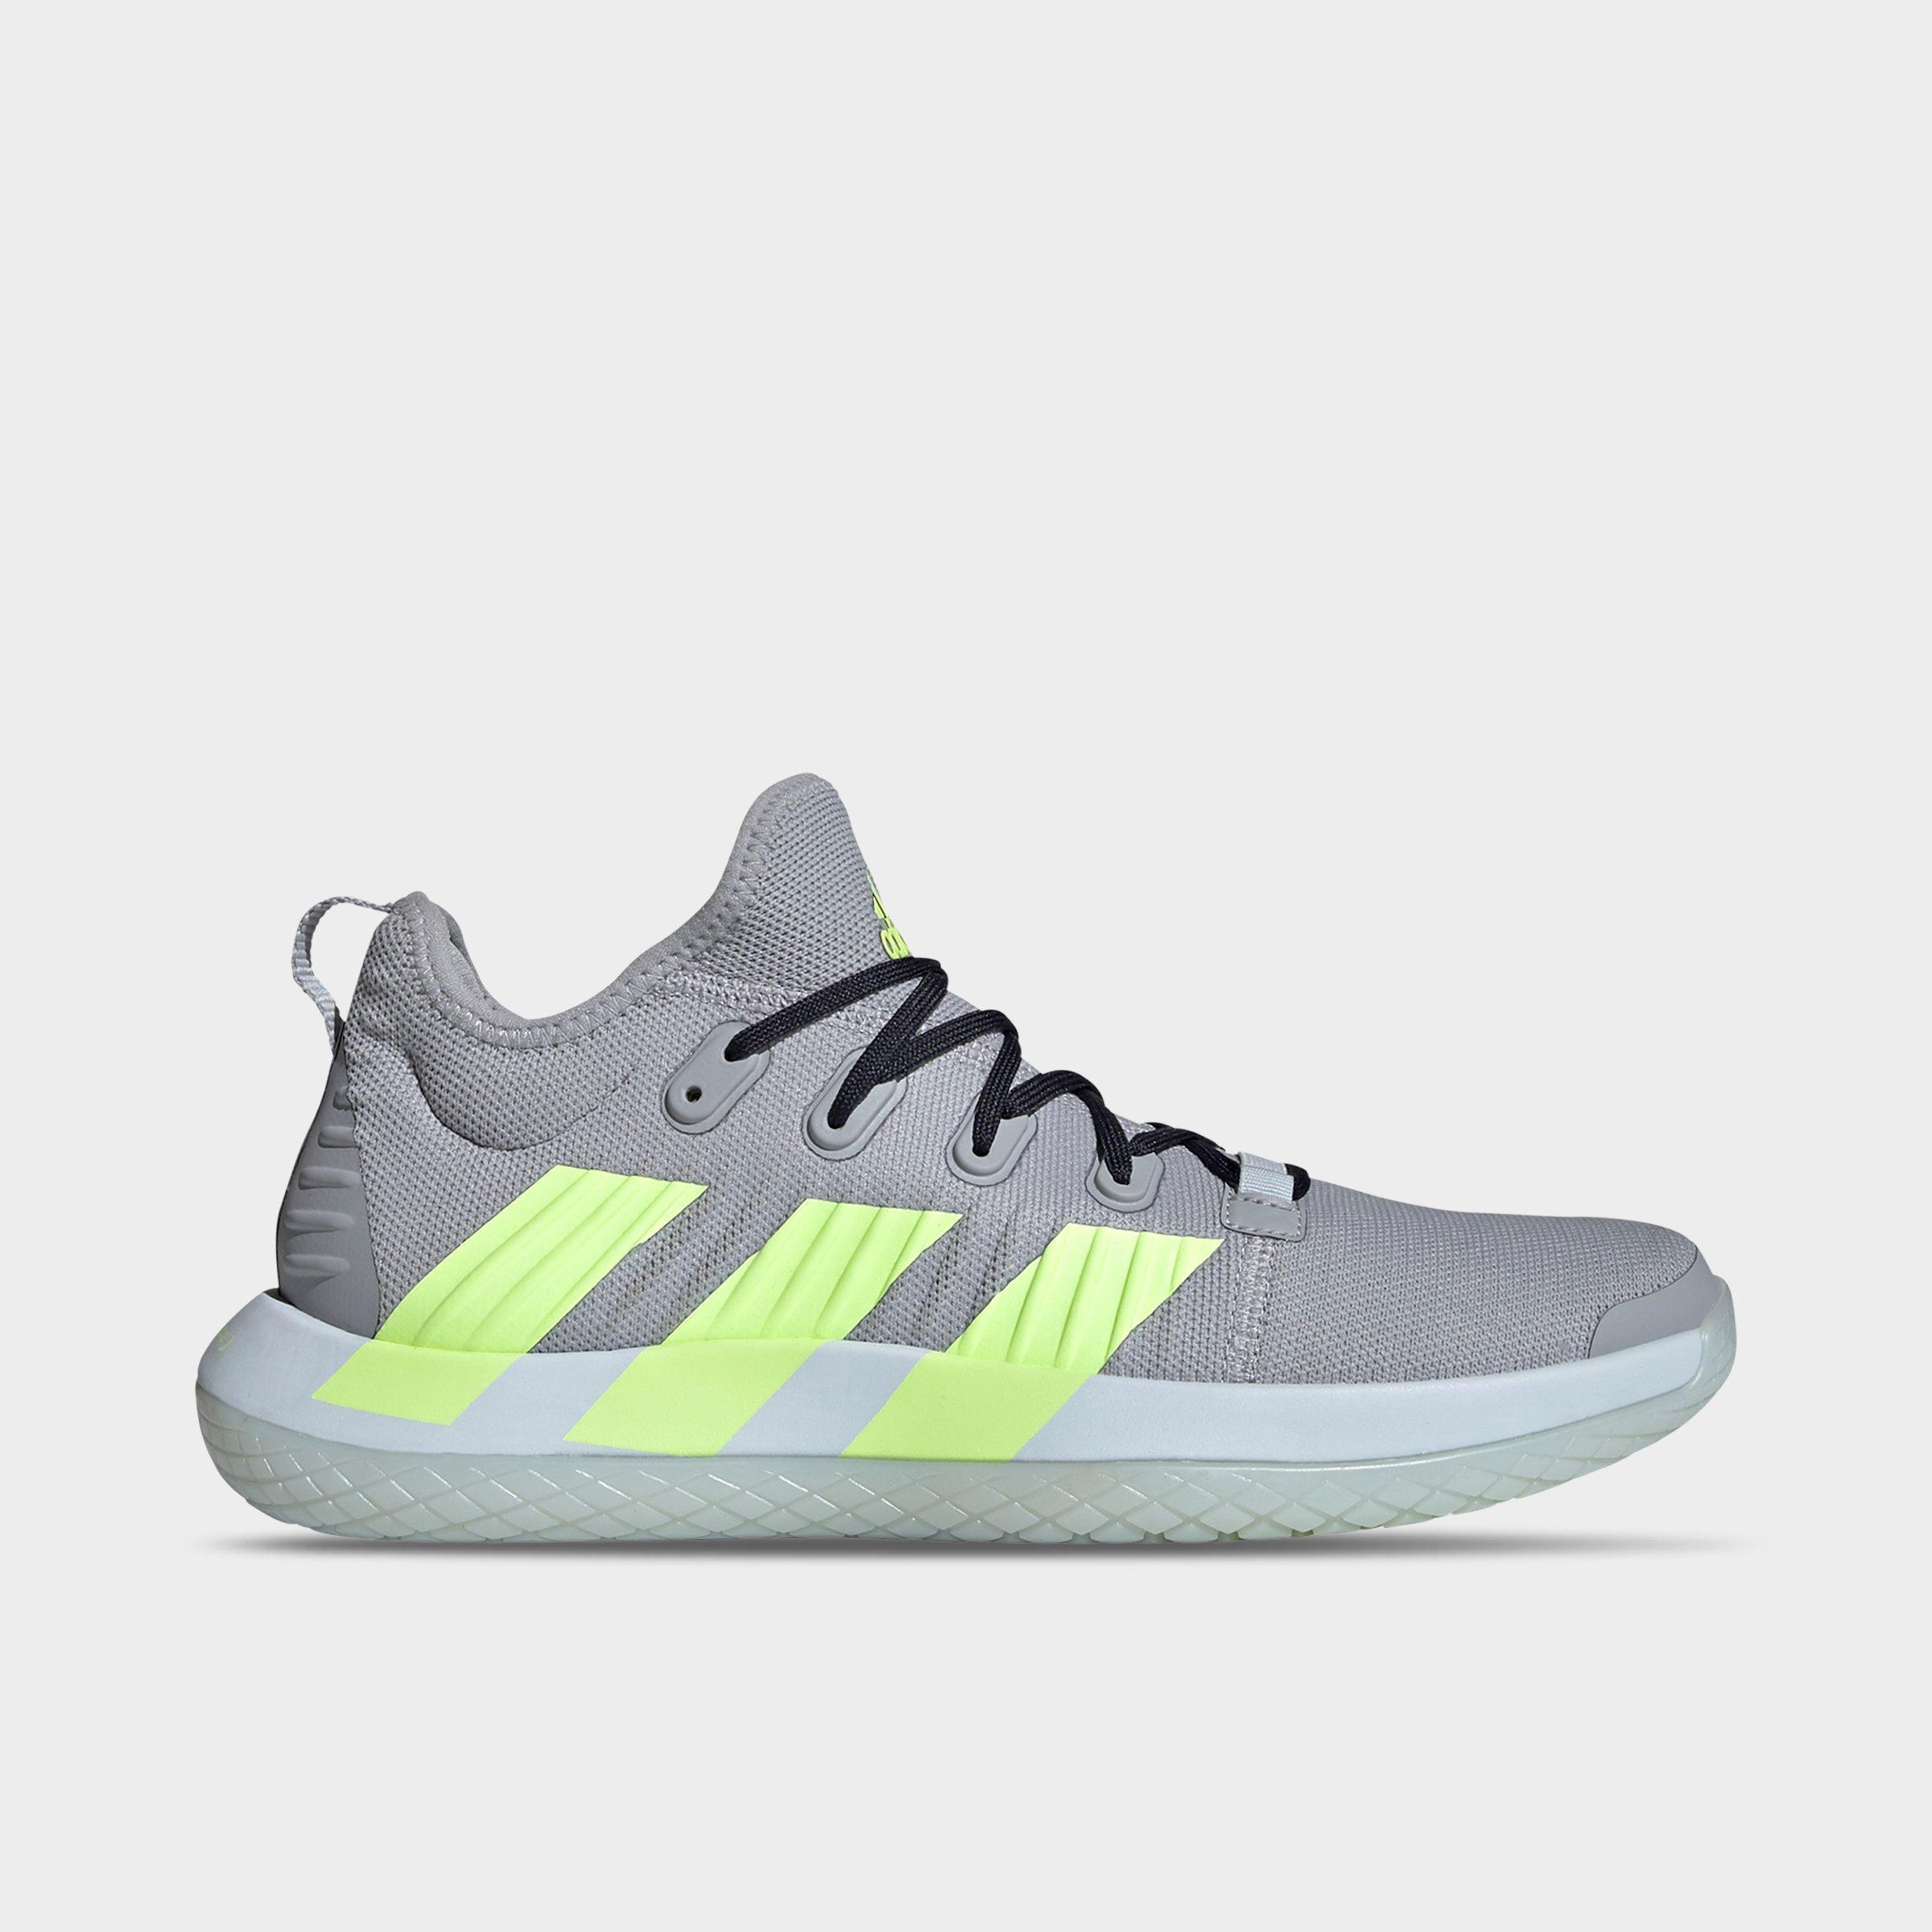 where can i return adidas online purchase in store